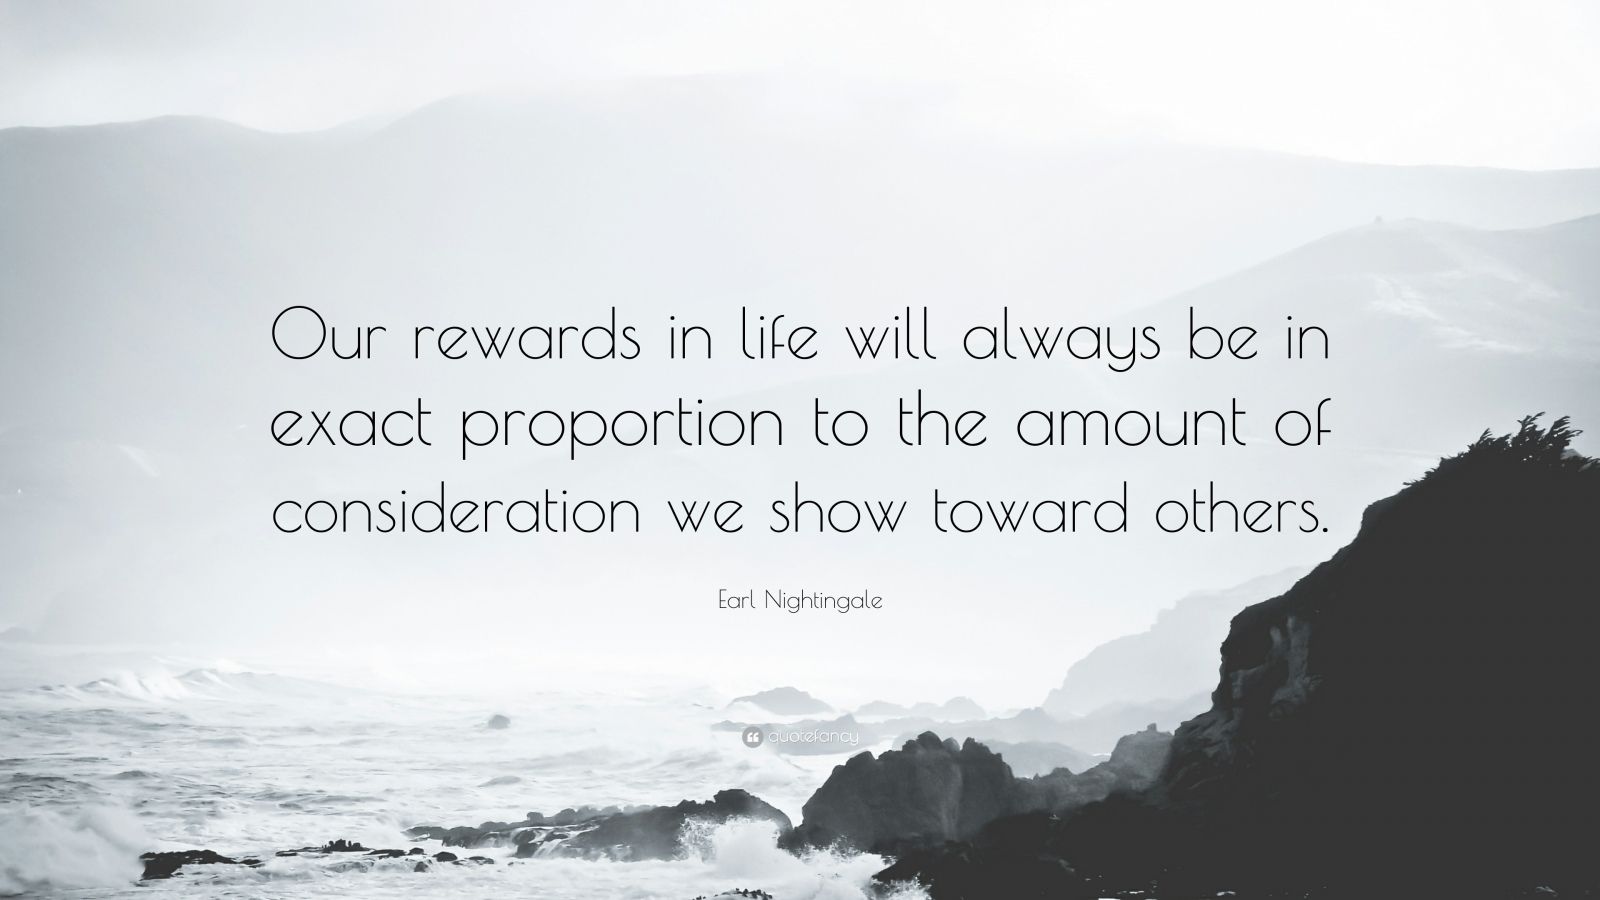 Earl Nightingale Quote: “Our rewards in life will always be in exact